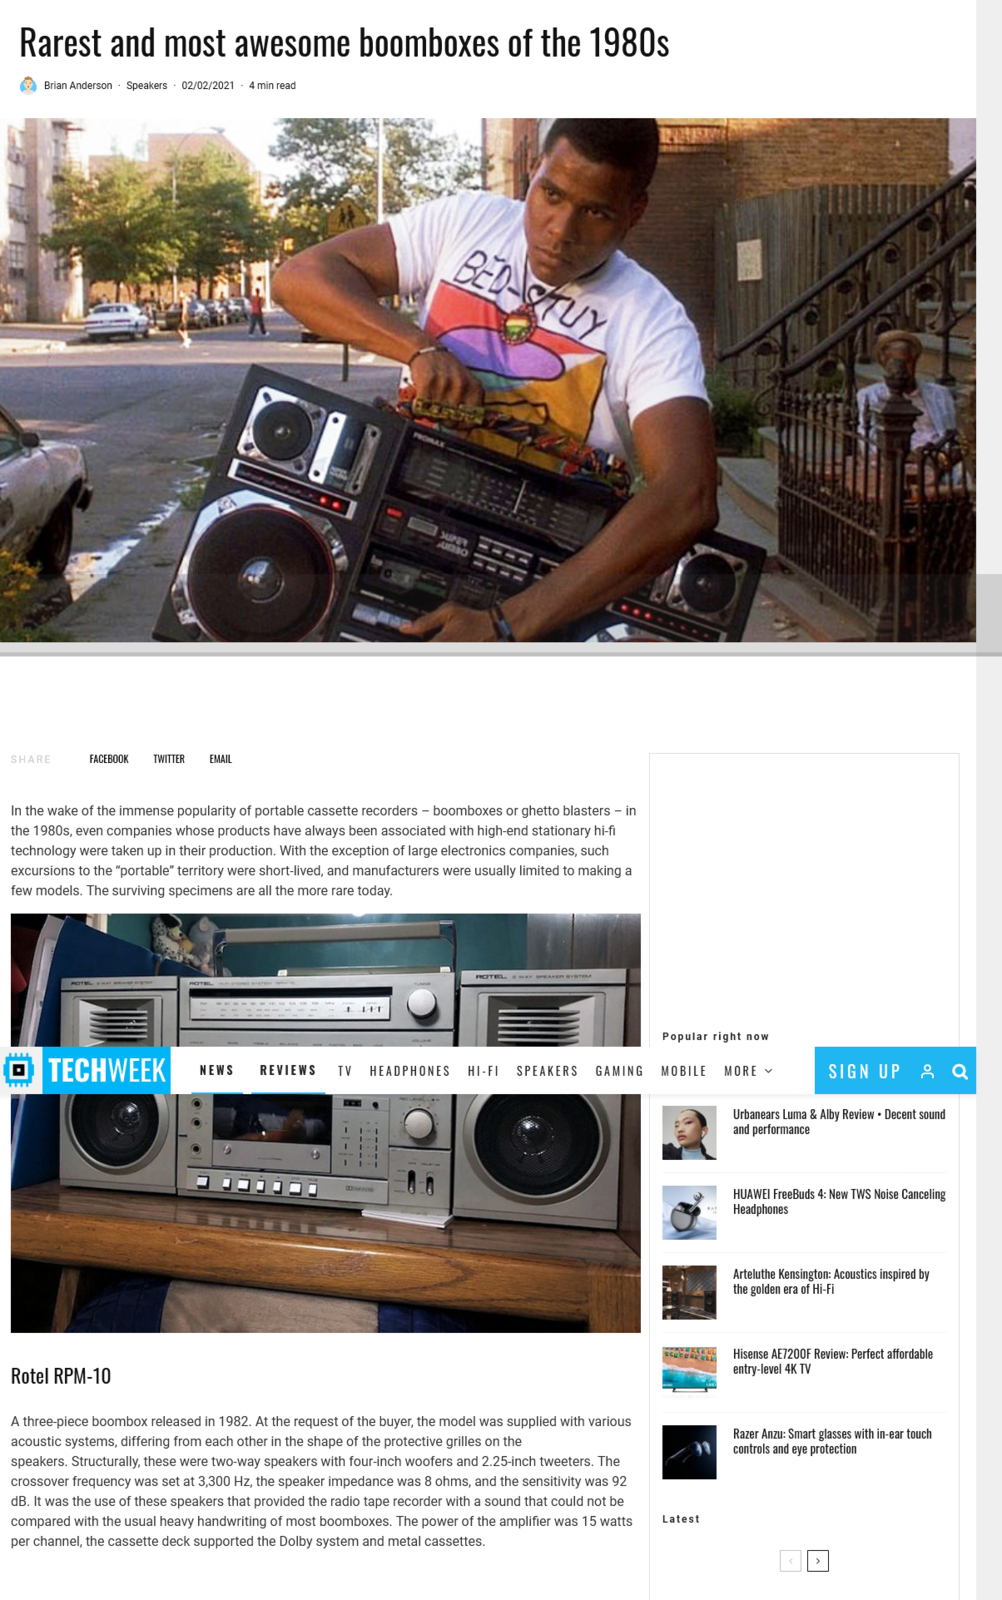 Rarest And Most Awesome Boomboxes Of The 1980s 1.png